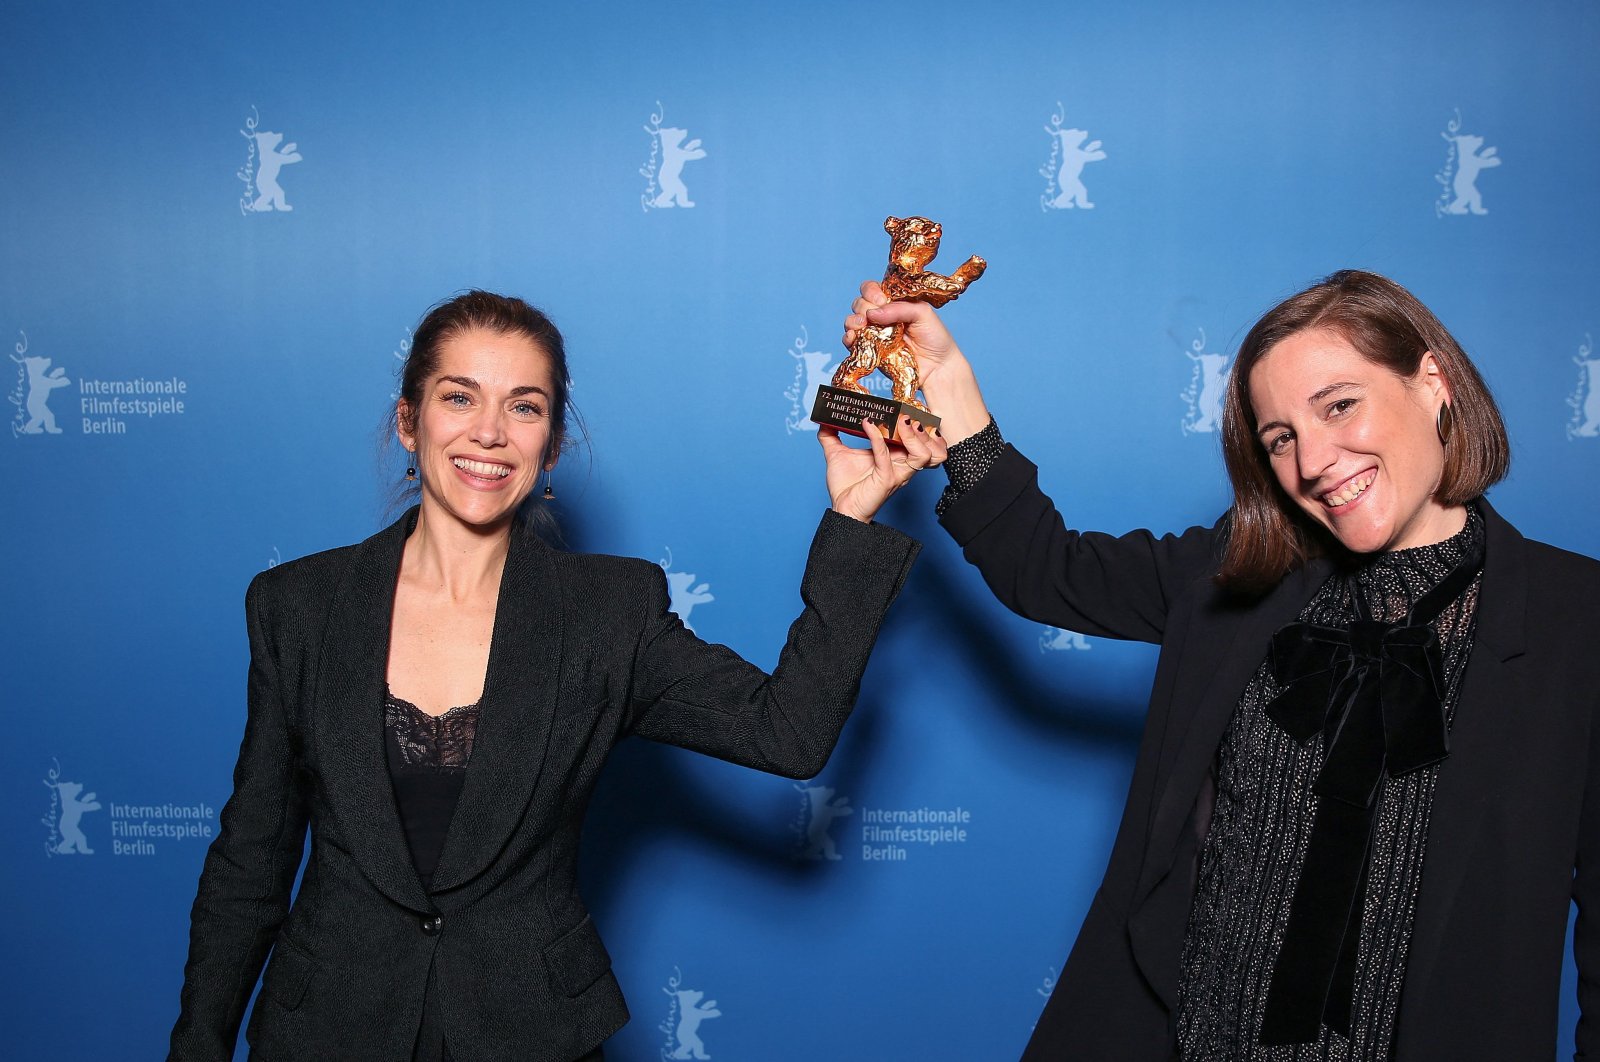 Spanish director and screenwriter Carla Simon (R) and producer Maria Zamora pose during a photo call after being awarded the Golden Bear for Best Film award for the film &quot;Alcarras&quot; after the awards ceremony of the 72nd Berlinale Film Festival in Berlin, Germany, Feb. 16, 2022. (AFP Photo)